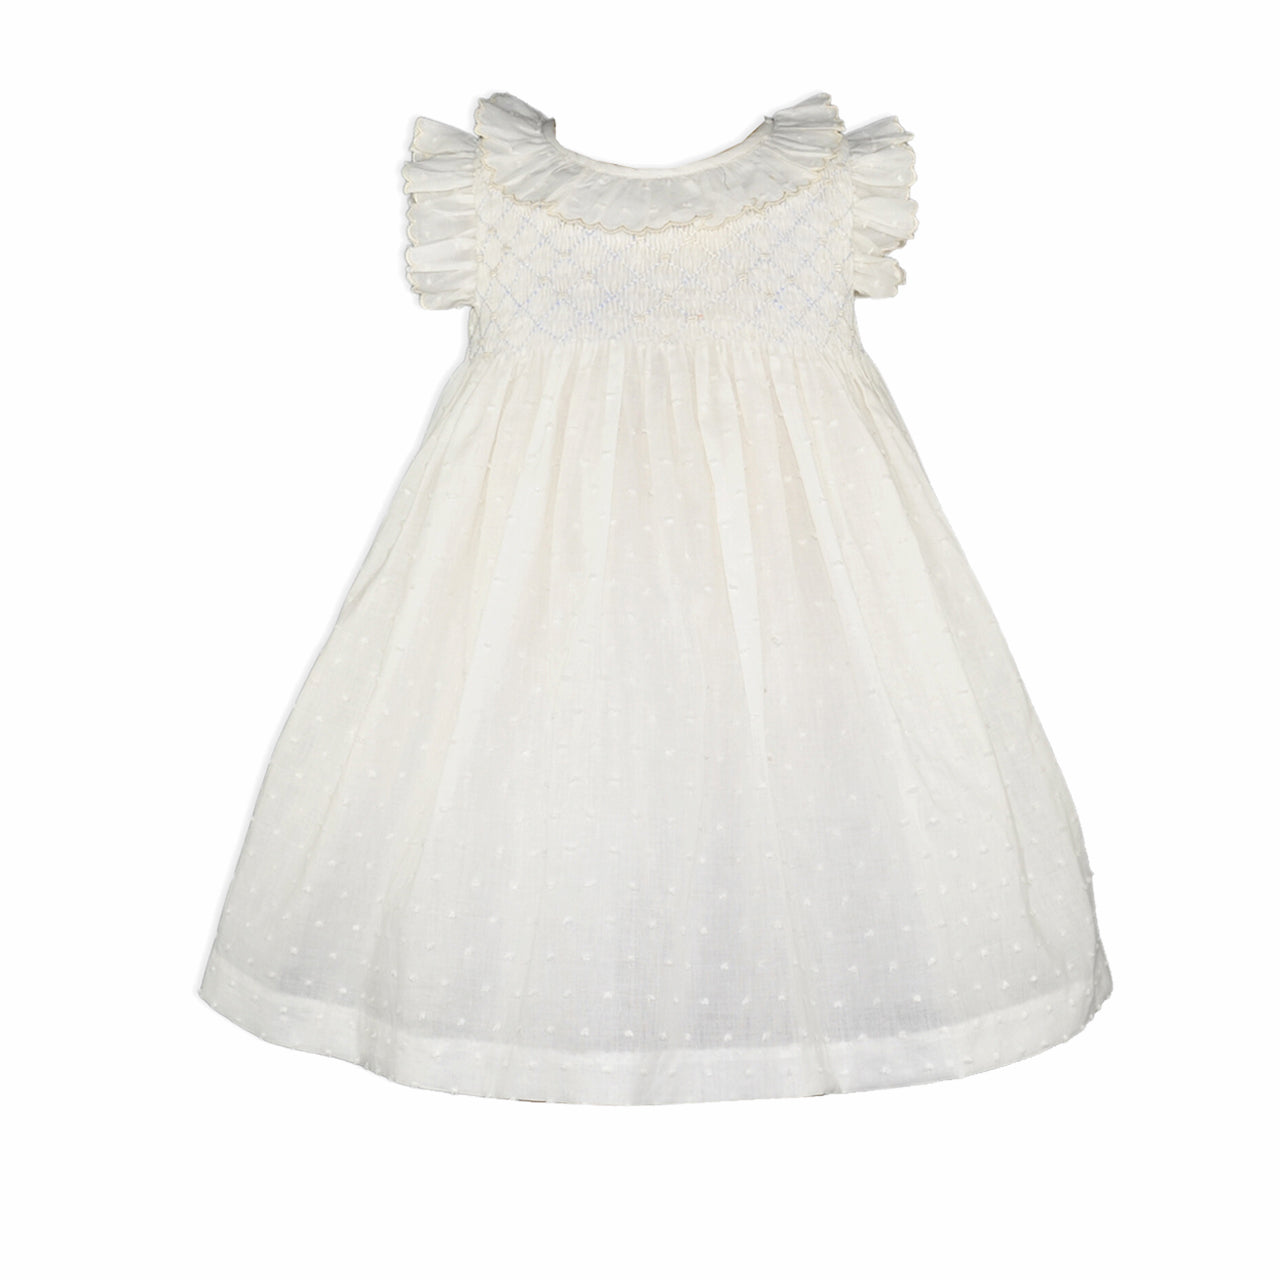 Elsa White Hand Smocked Dress with diaper cover